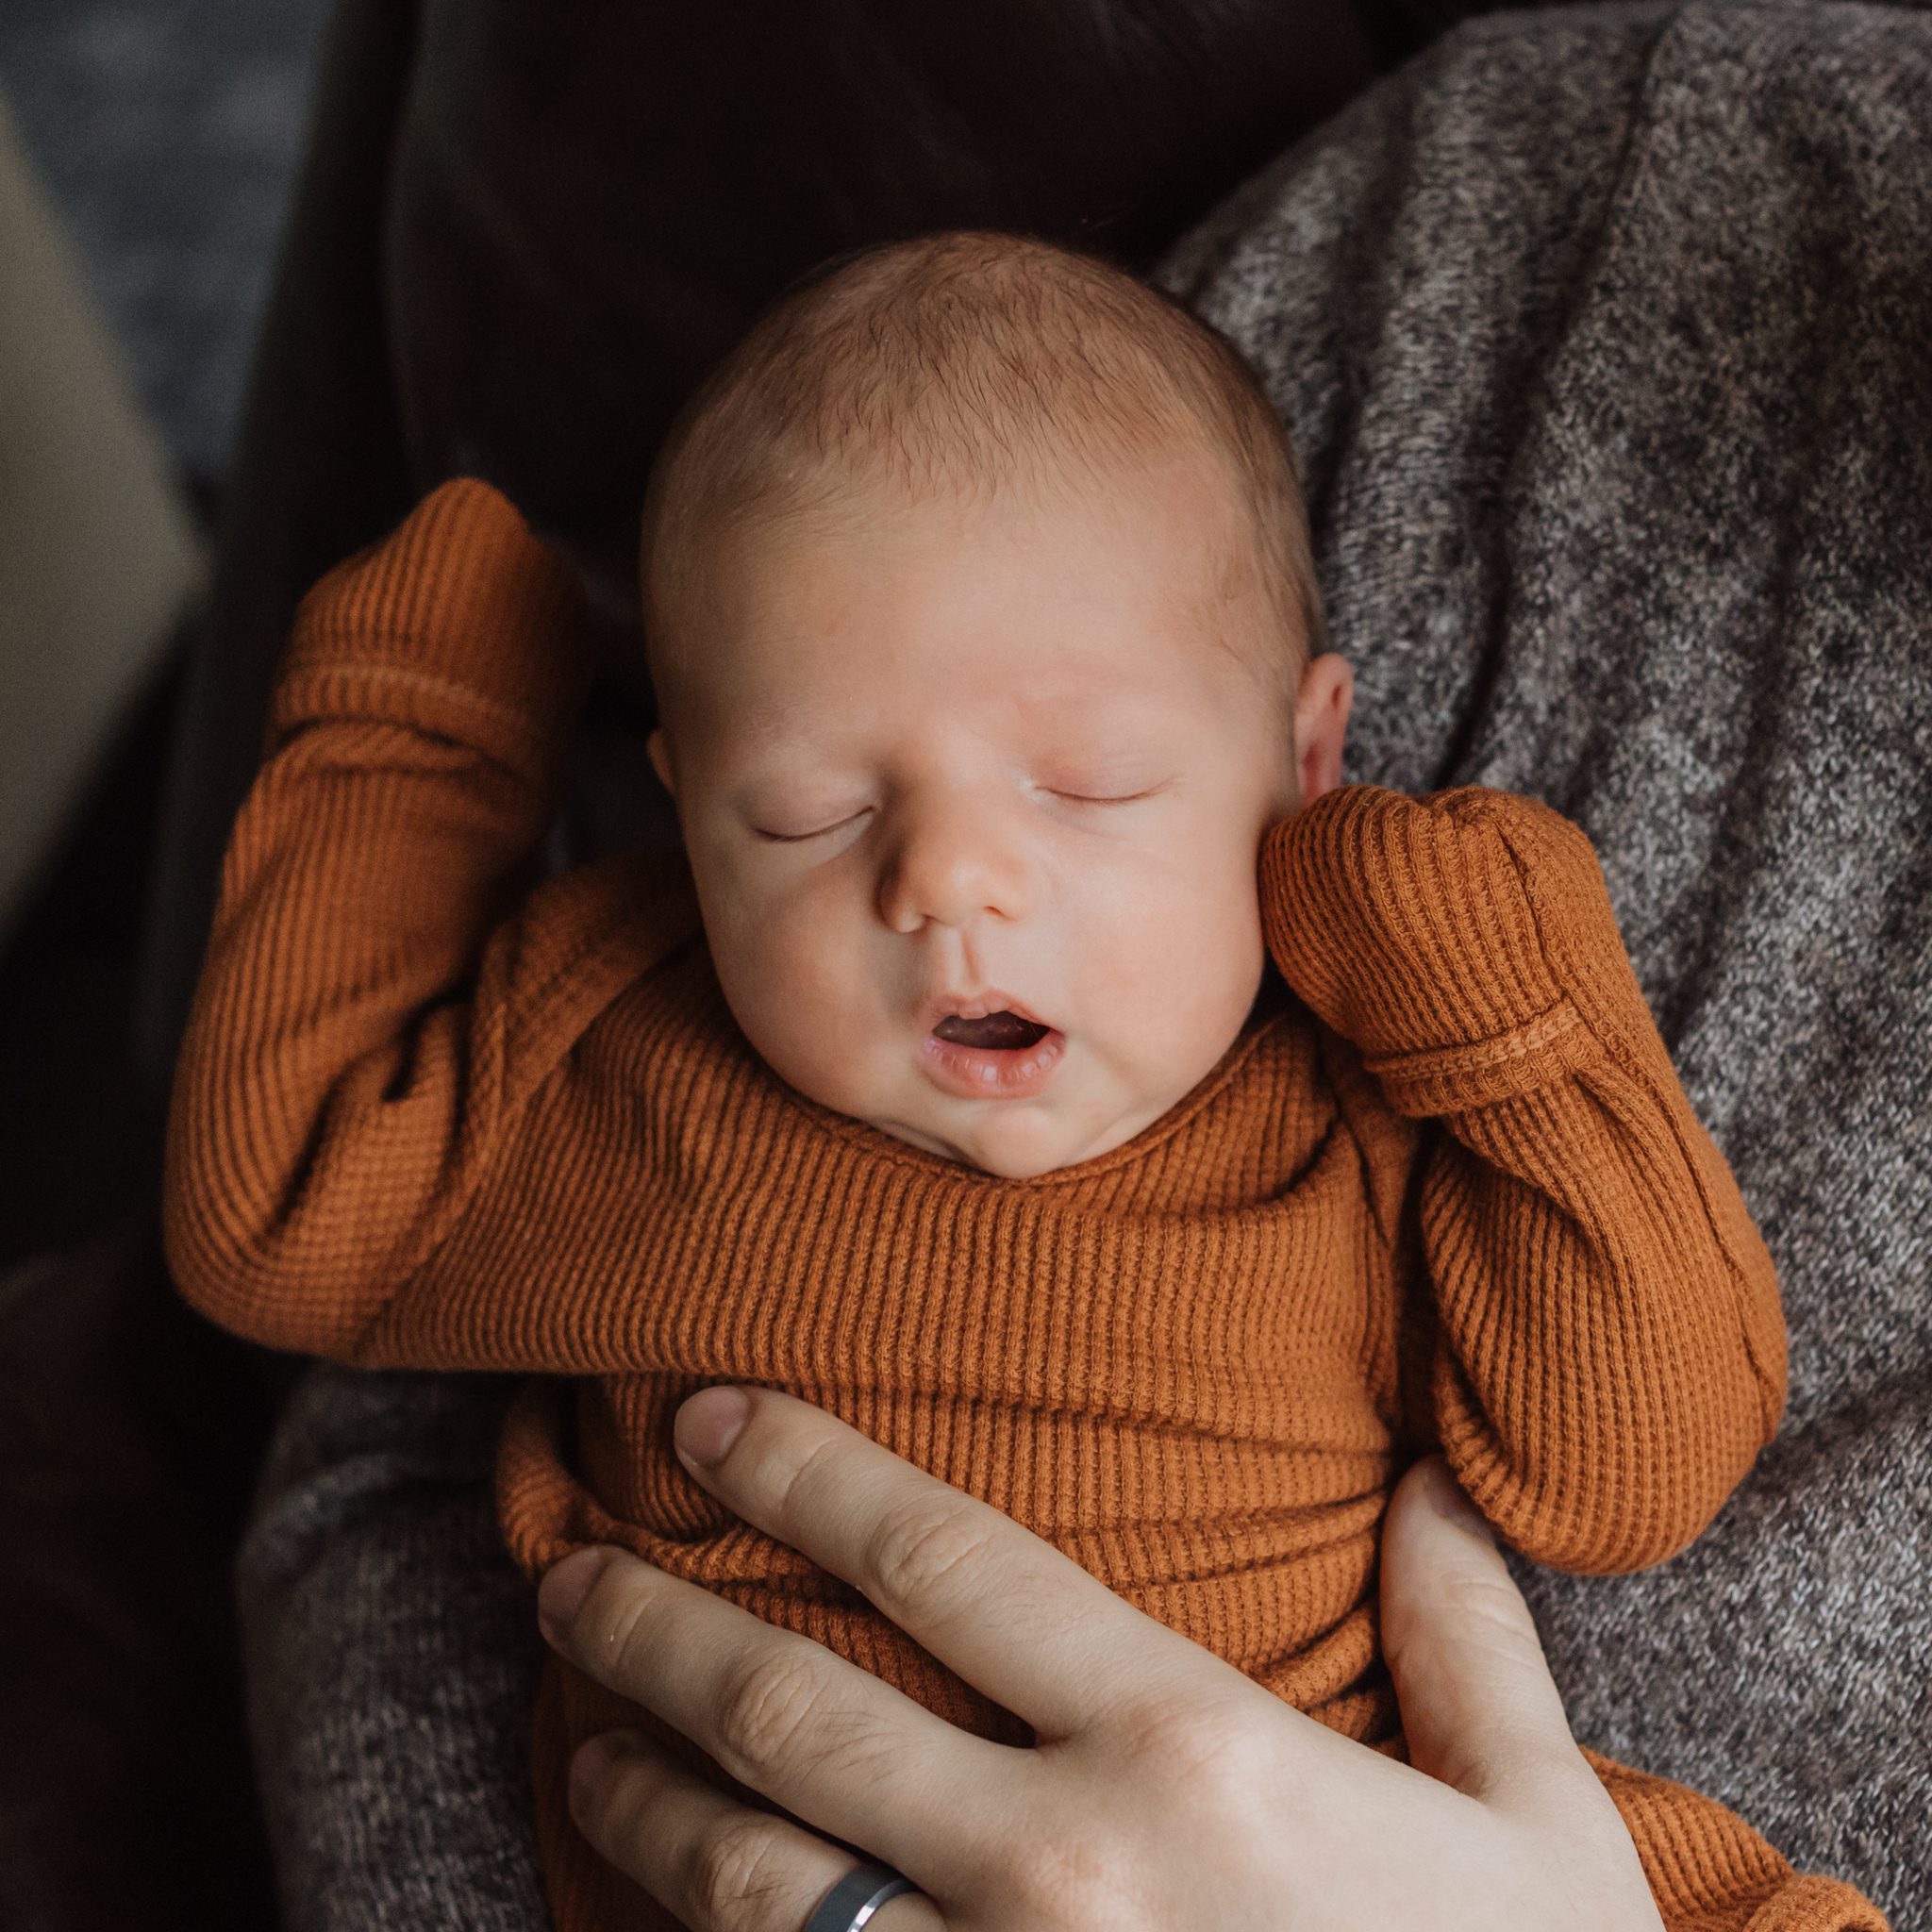 sleeping newborn with mouth open in dads arms by the window light